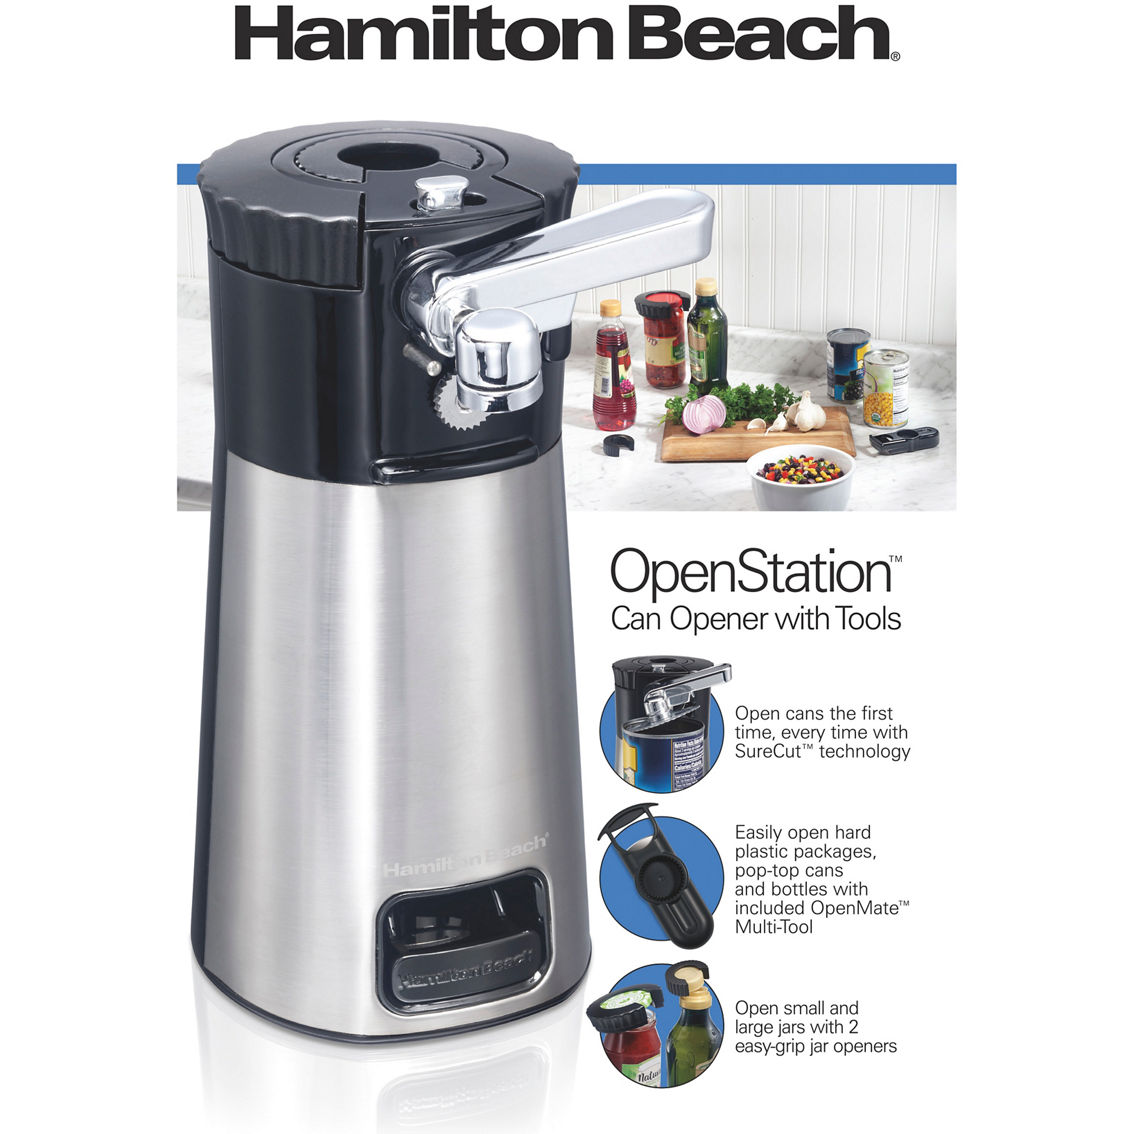 Hamilton Beach OpenStation Can Opener with Tools - Image 2 of 3